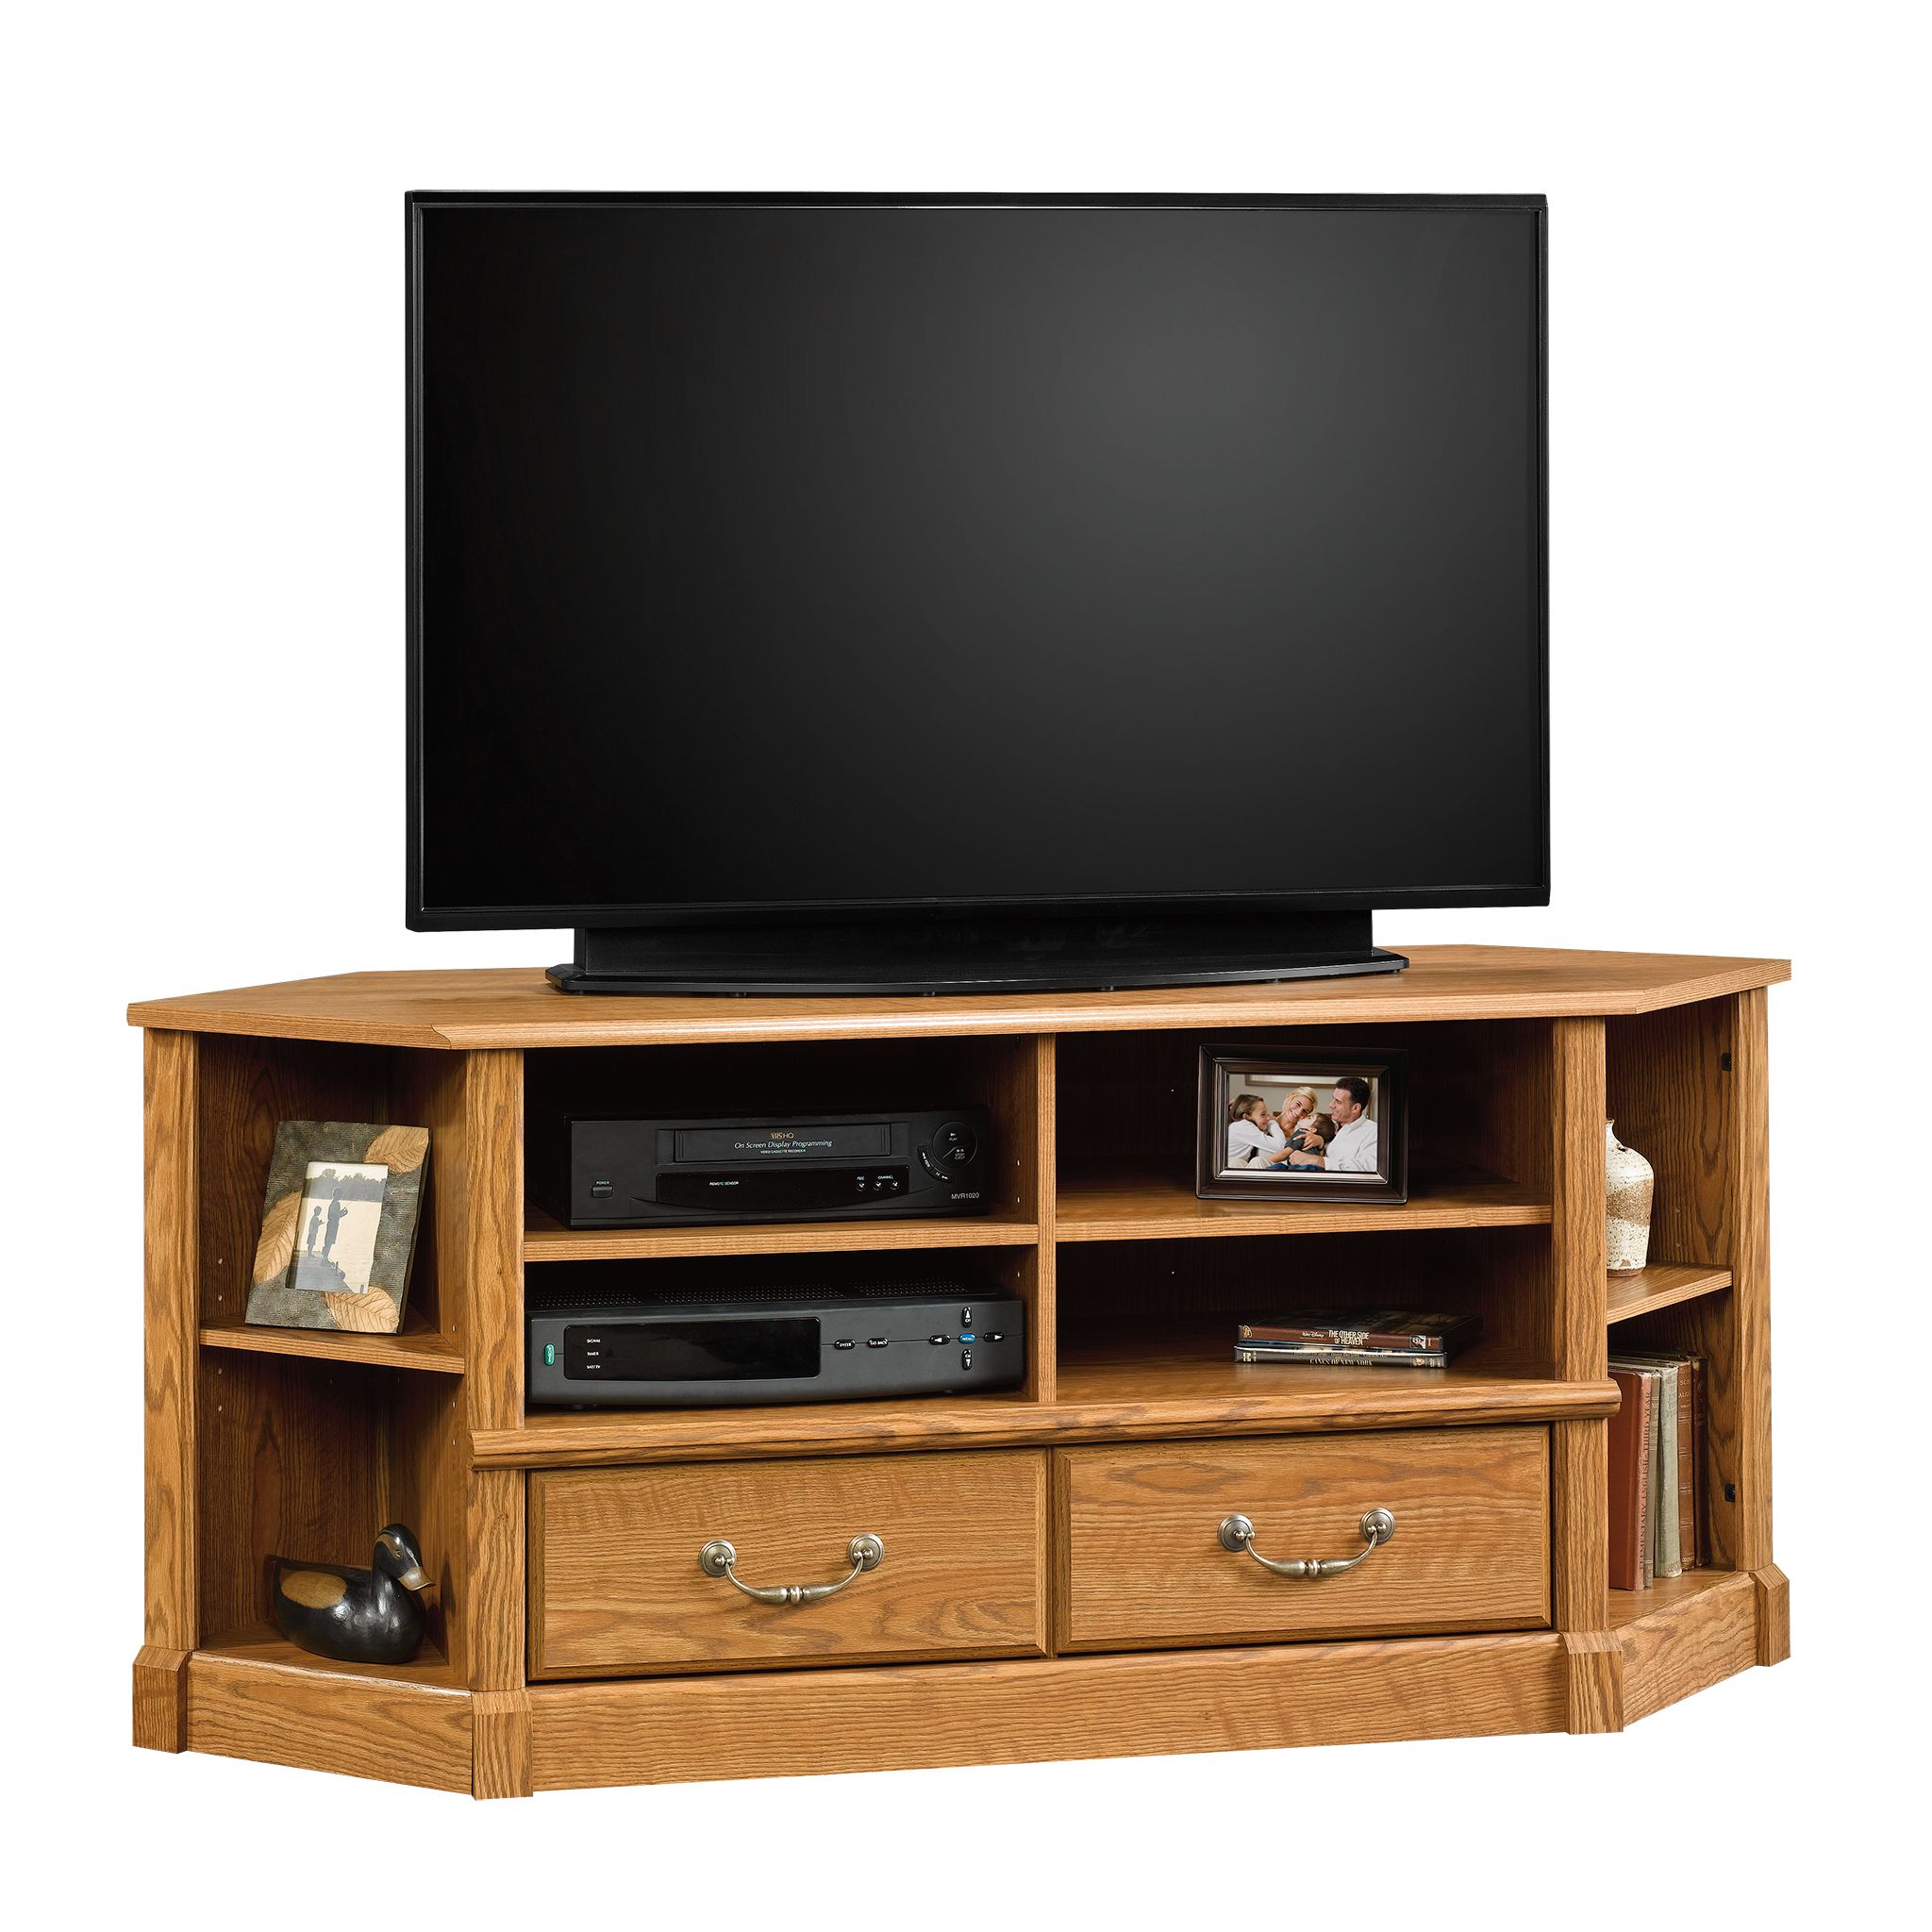 Sauder Orchard Hills Corner Tv Stand For Tvs Up To 50 Intended For Corner Tv Stands For 50 Inch Tv (View 2 of 15)